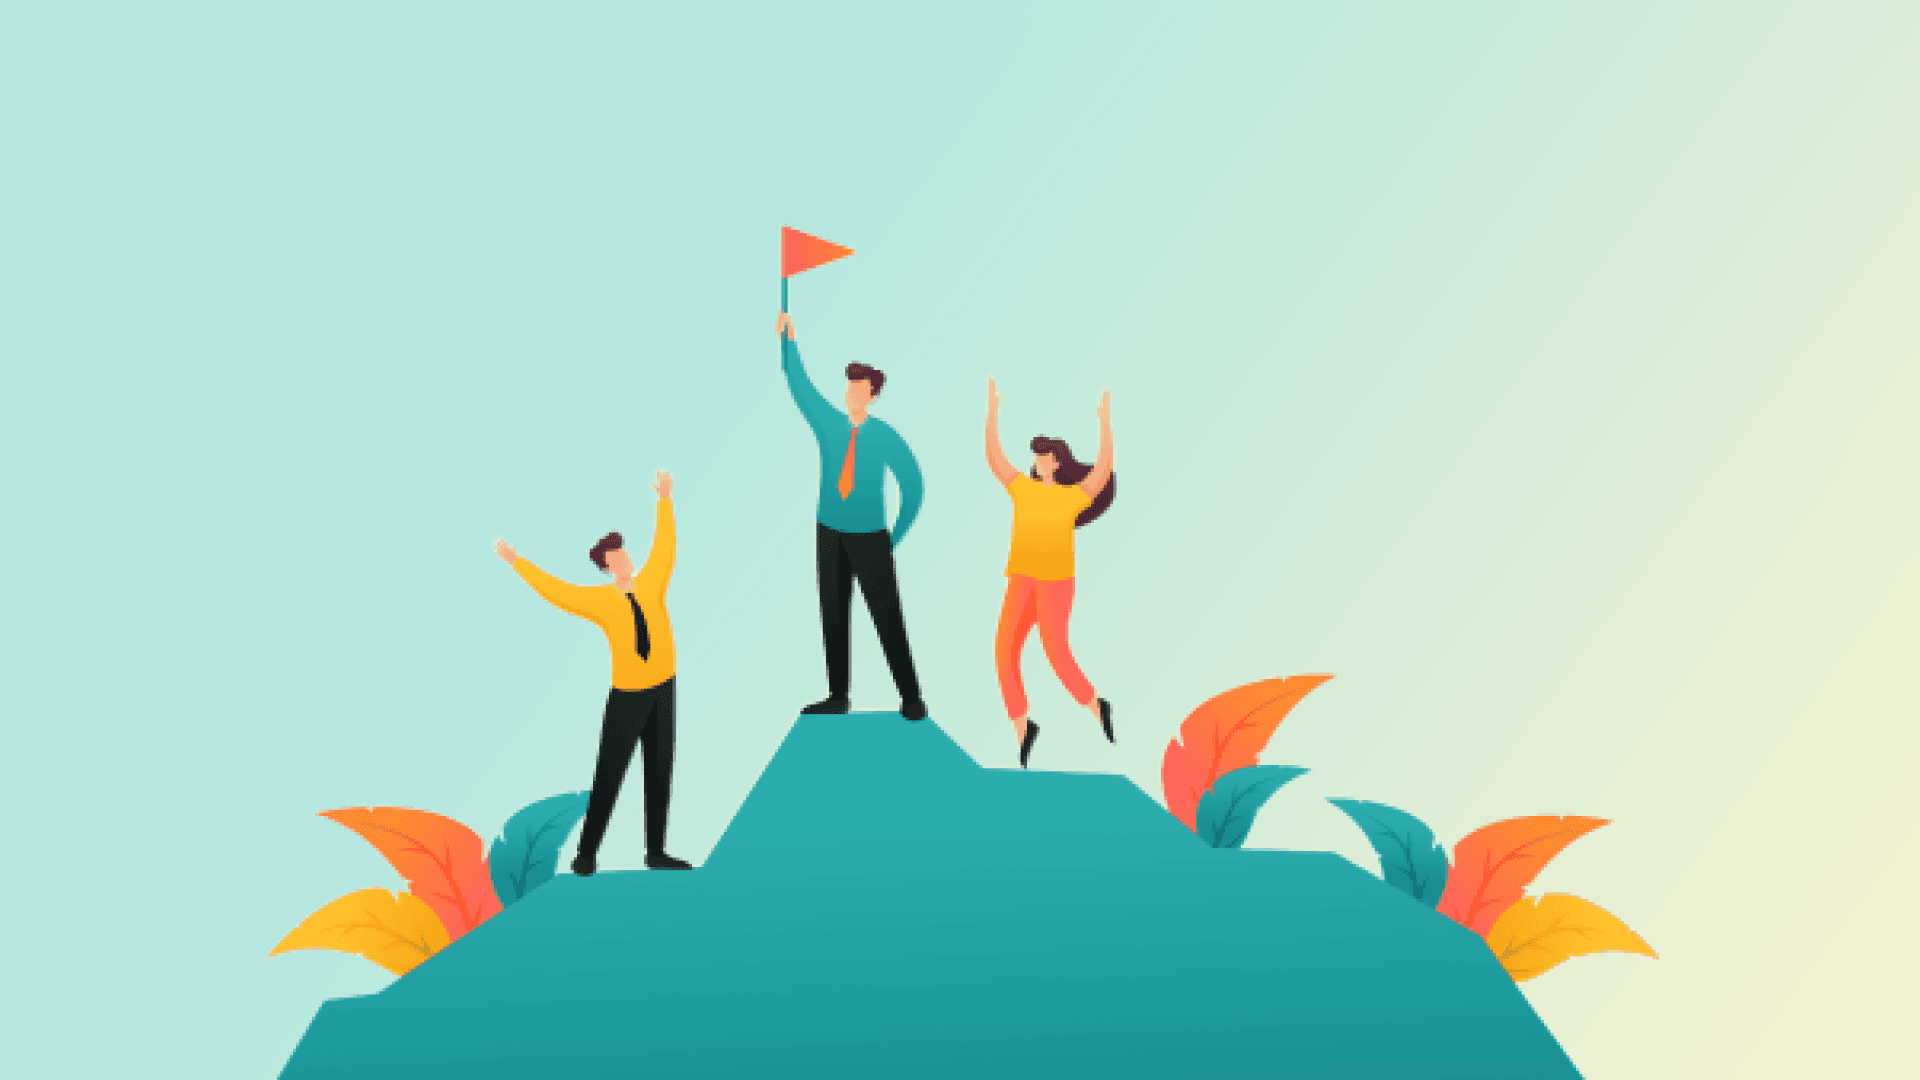 An infographic image of 3 people on a hill celebrating with raising red flag